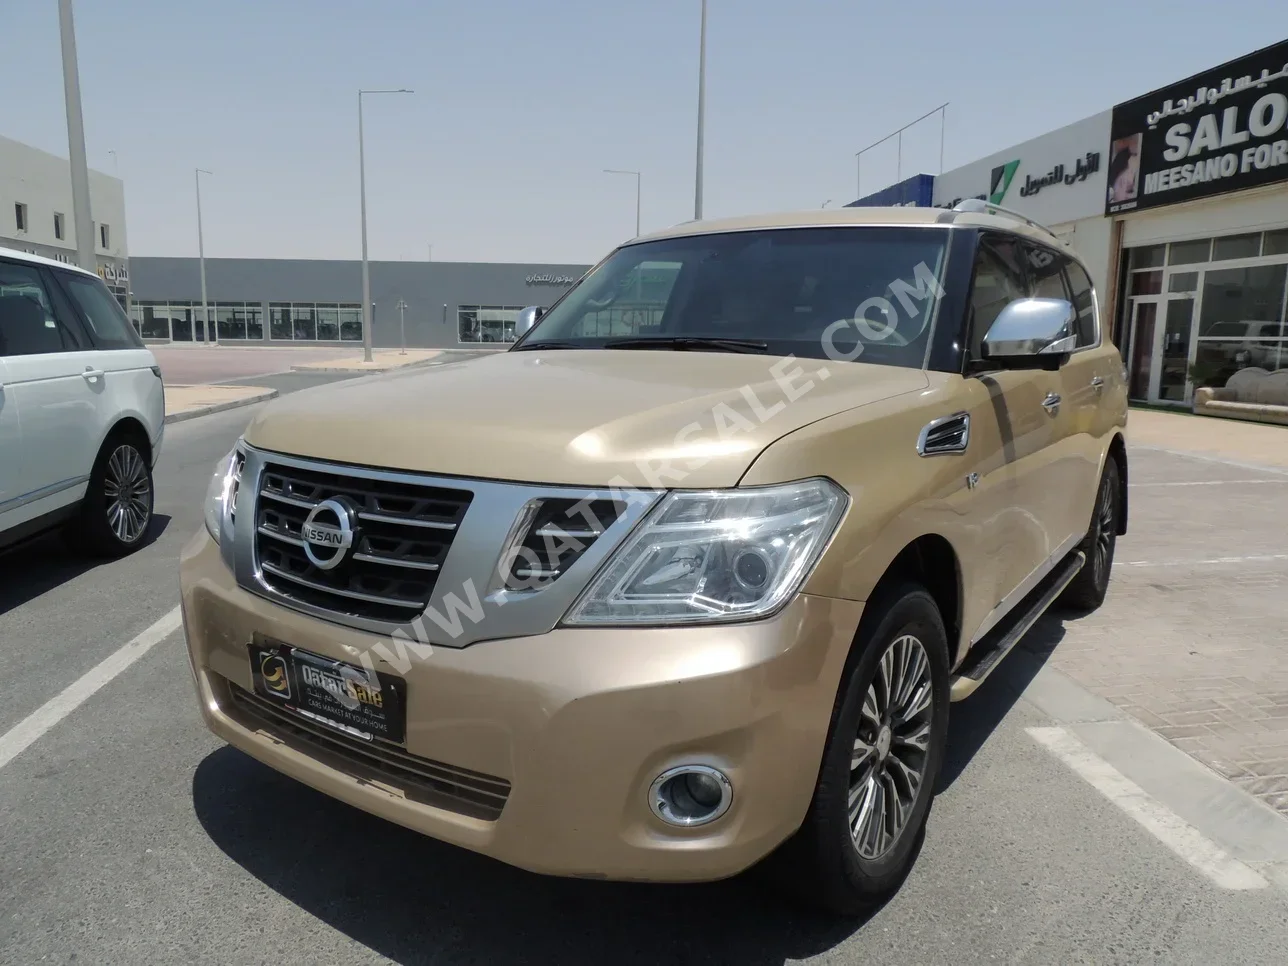 Nissan  Patrol  LE  2012  Automatic  335,000 Km  8 Cylinder  Four Wheel Drive (4WD)  SUV  Gold